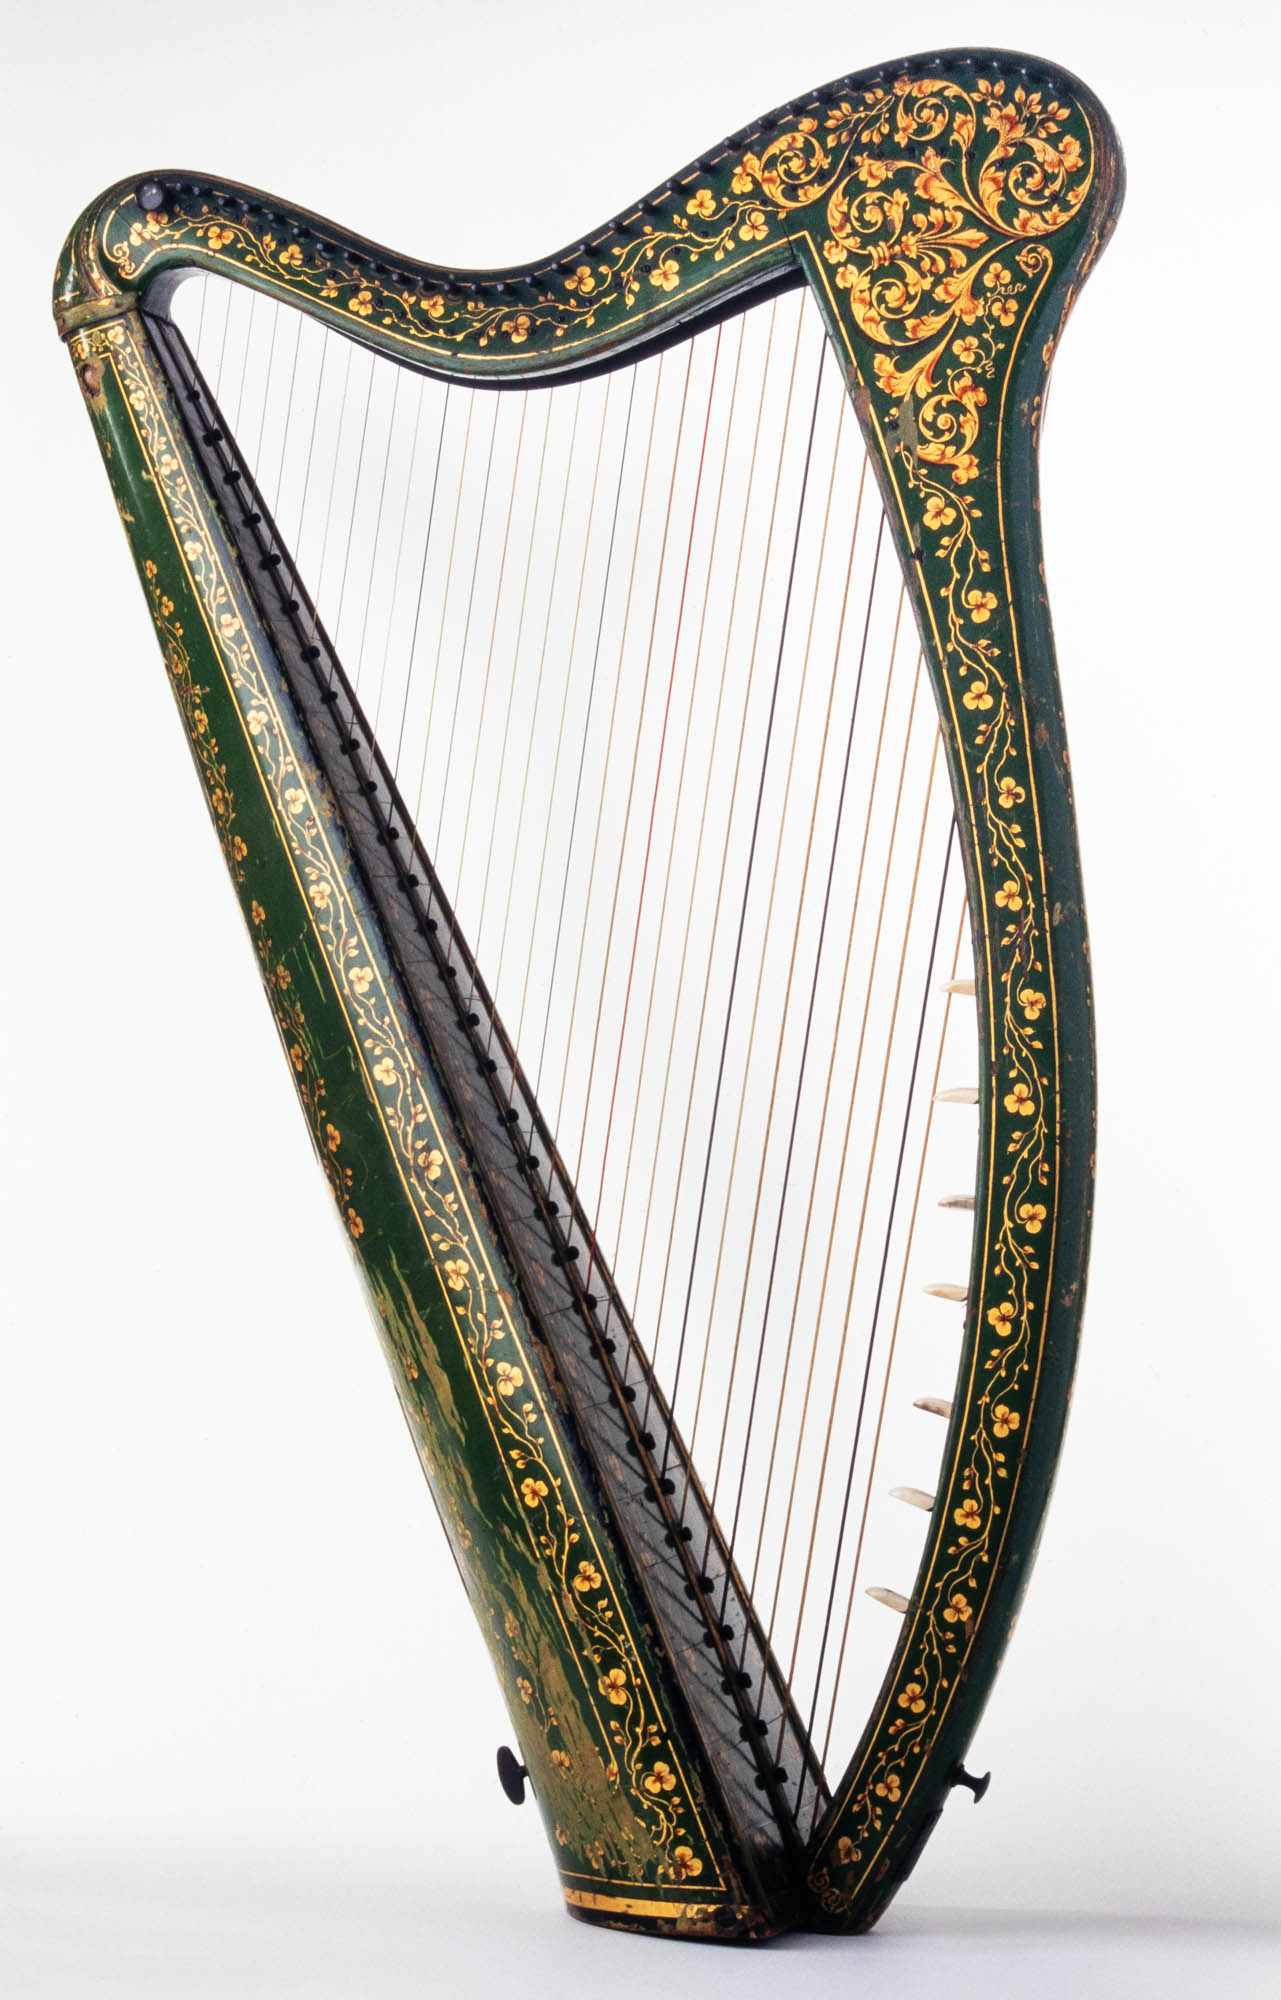 Green harp intricately decorated with arrays of golden shamrocks